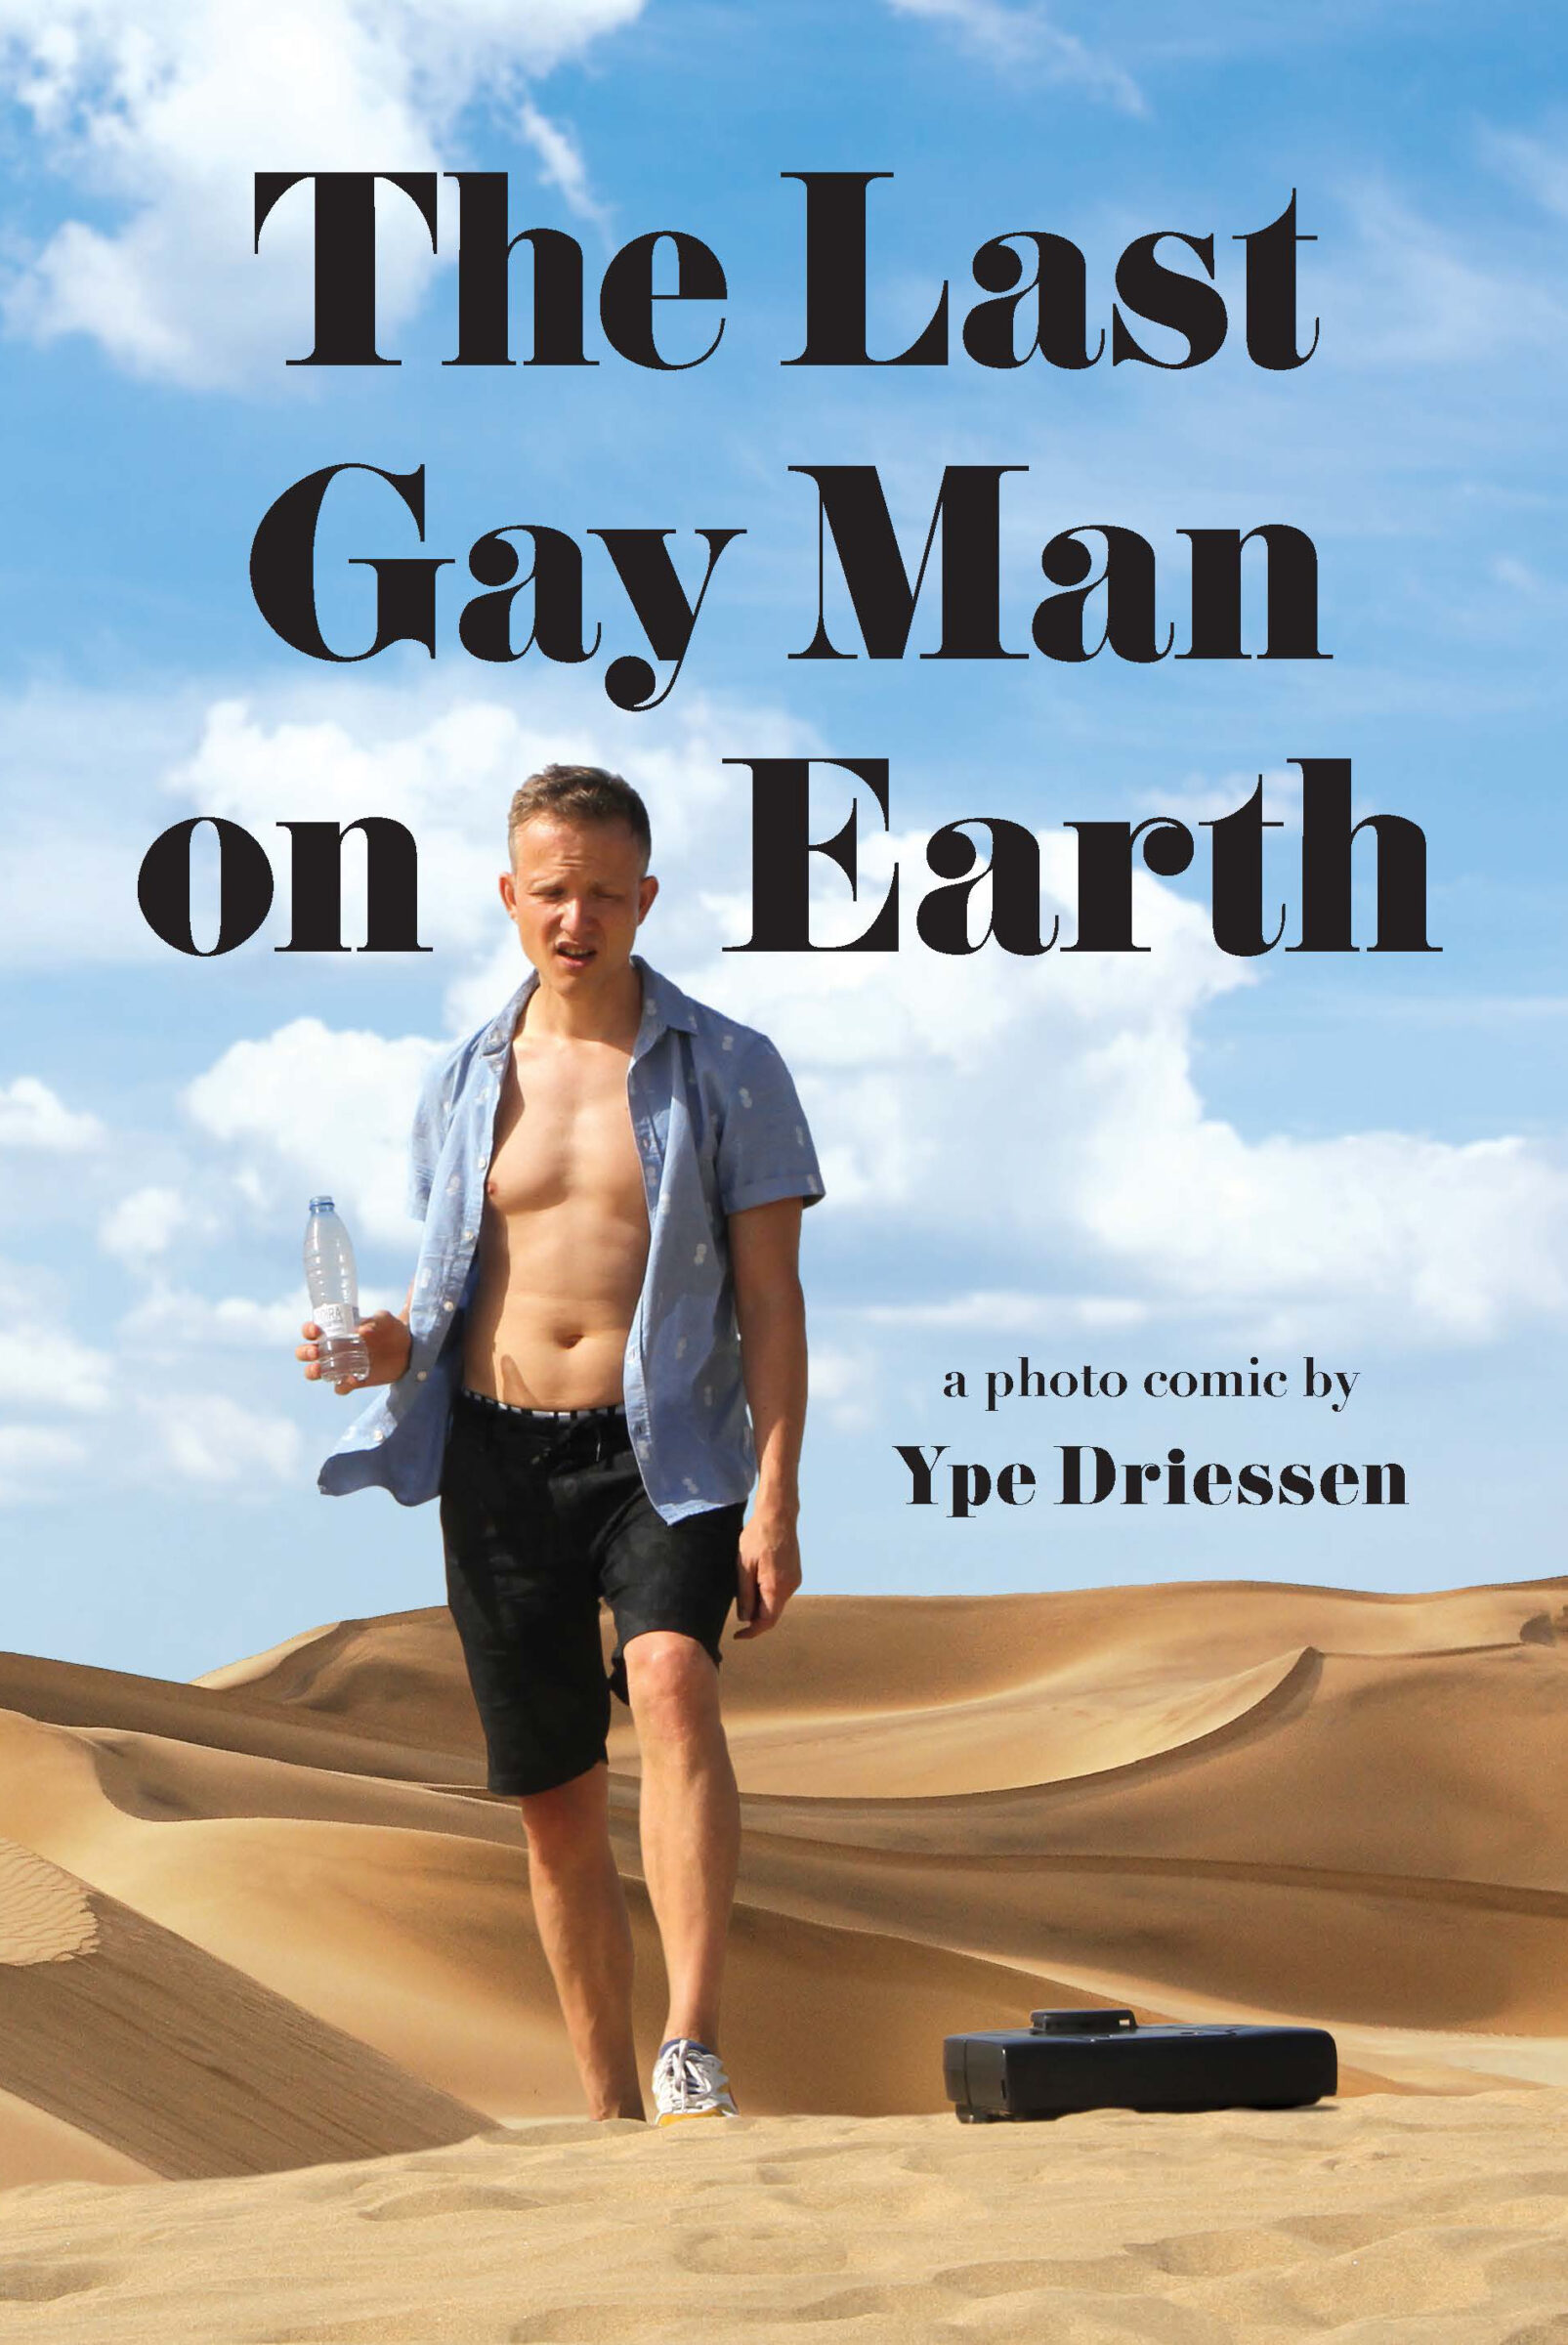 Cover image last gay man on earth